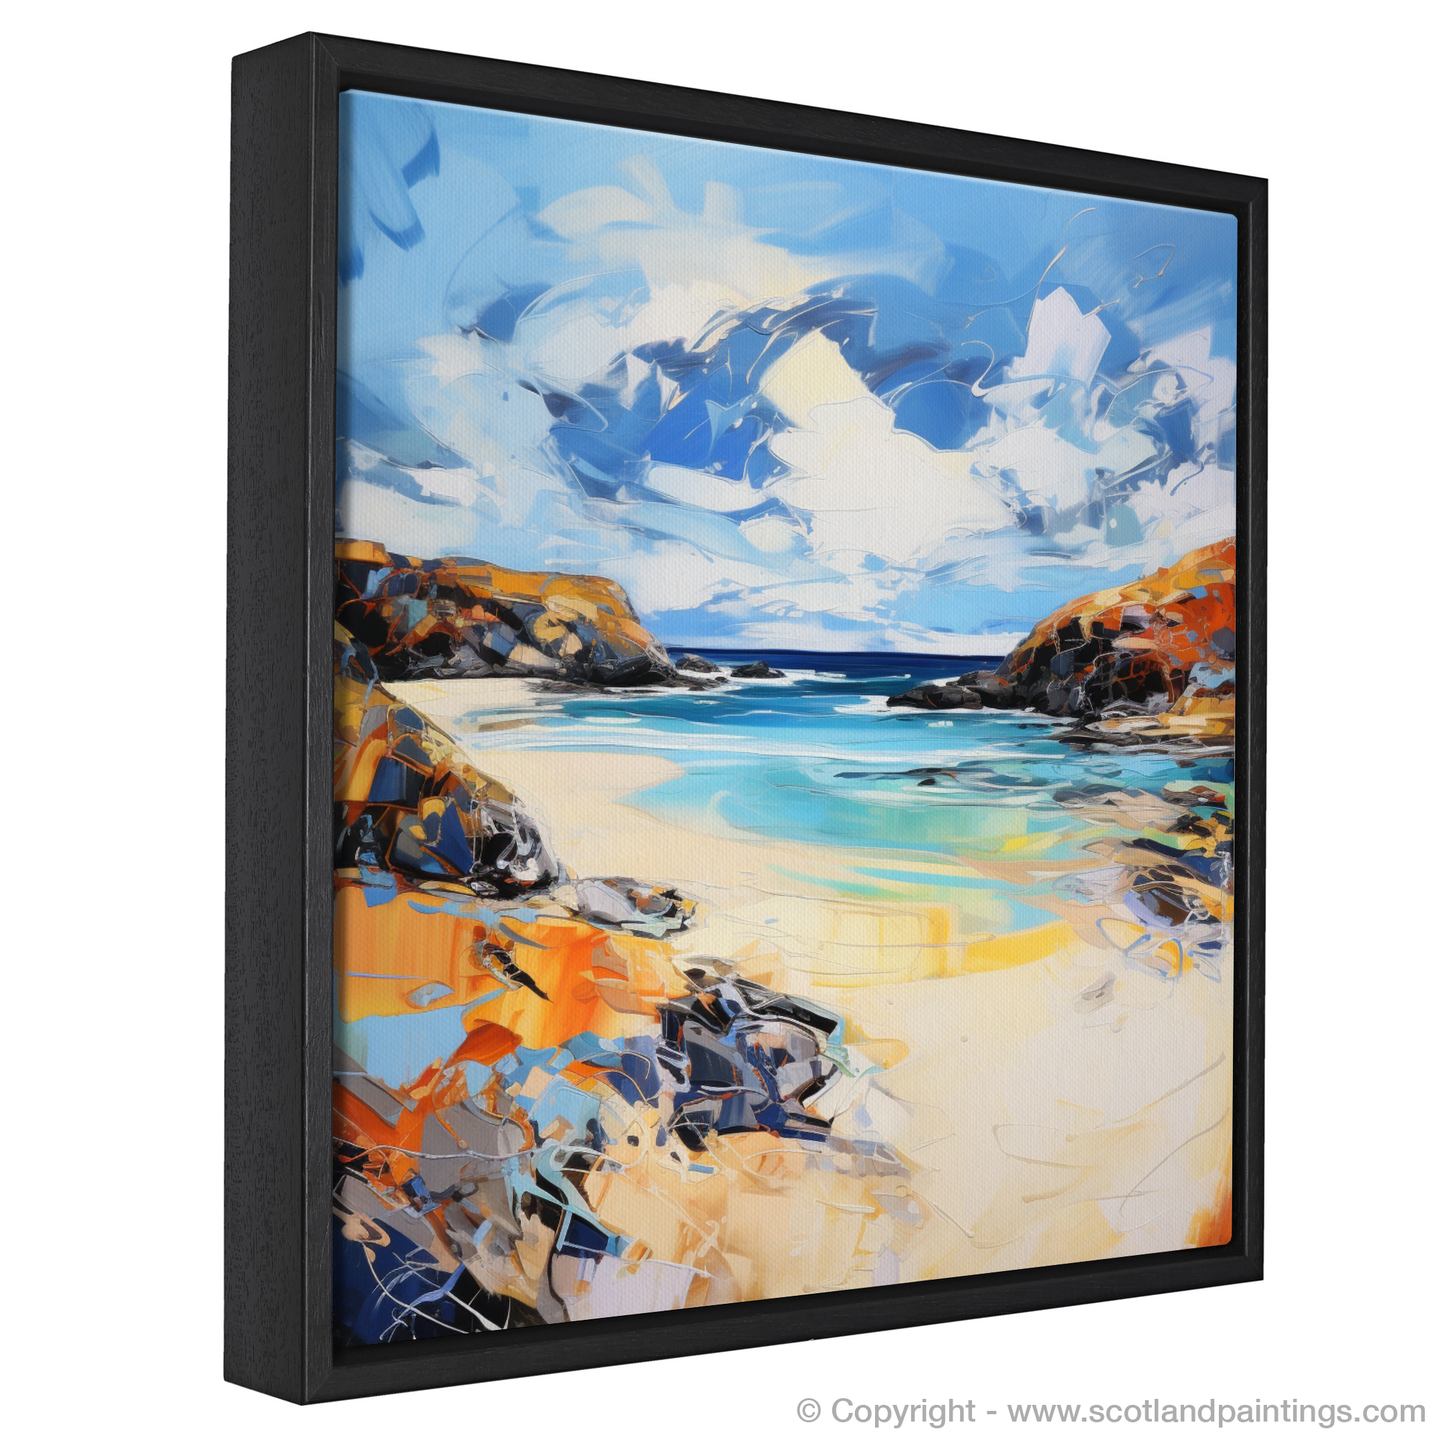 Painting and Art Print of Balnakeil Bay, Durness, Sutherland entitled "Expressionist Ode to Balnakeil Bay".